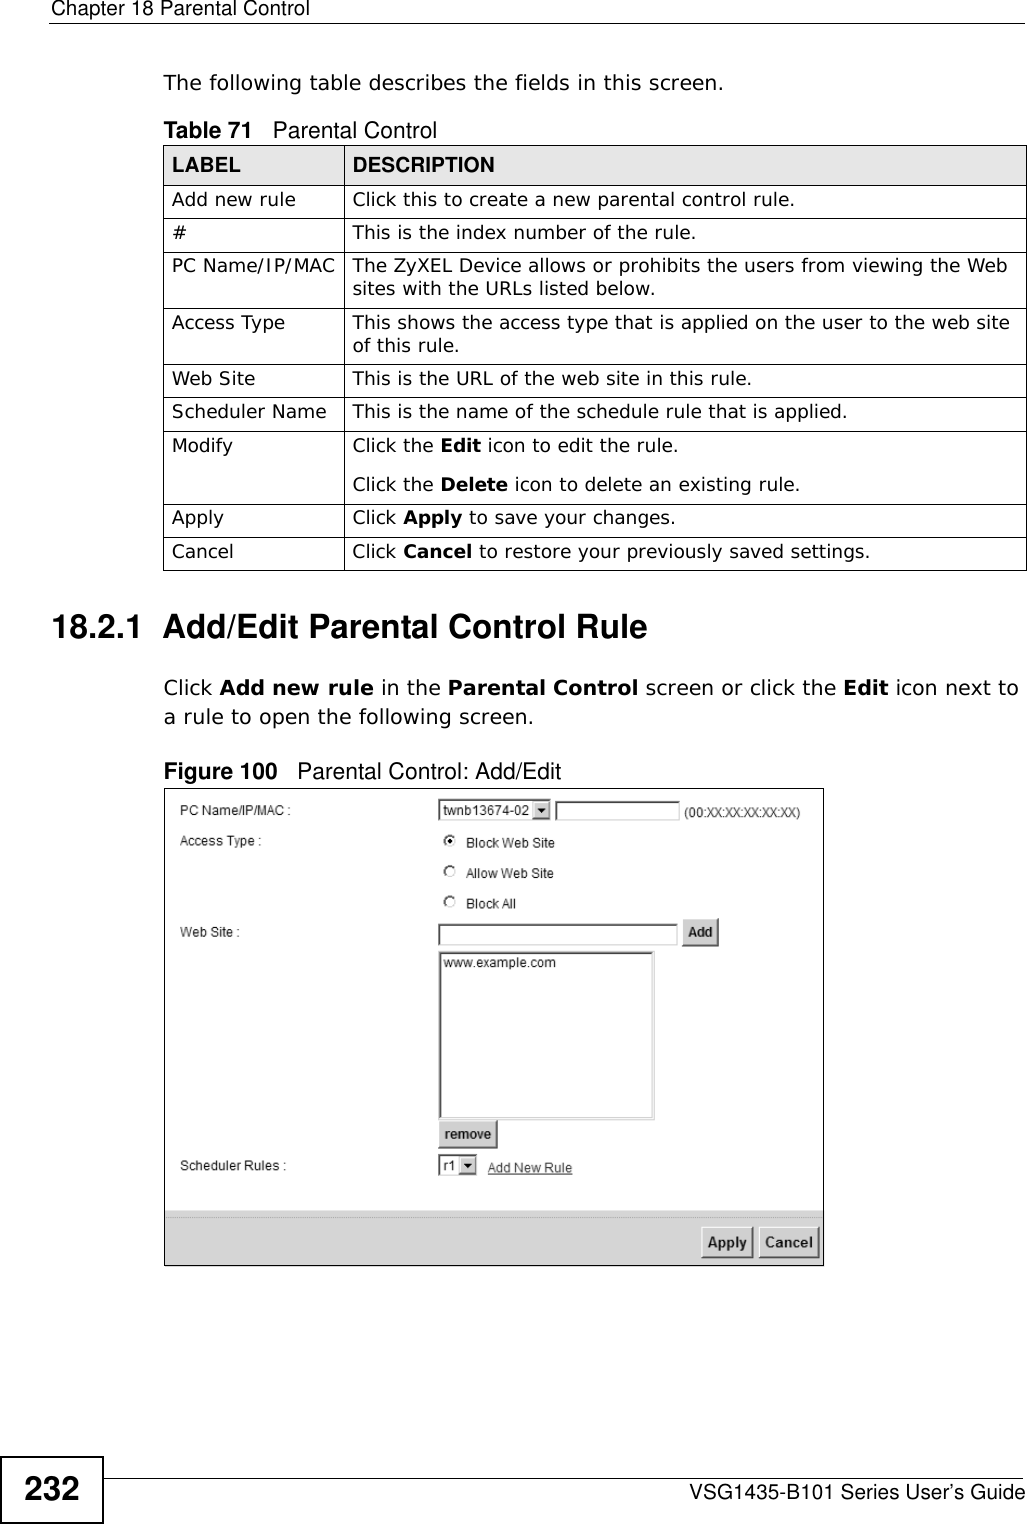 Chapter 18 Parental ControlVSG1435-B101 Series User’s Guide232The following table describes the fields in this screen. 18.2.1  Add/Edit Parental Control RuleClick Add new rule in the Parental Control screen or click the Edit icon next to a rule to open the following screen. Figure 100   Parental Control: Add/Edit Table 71   Parental ControlLABEL DESCRIPTIONAdd new rule Click this to create a new parental control rule.# This is the index number of the rule.PC Name/IP/MAC The ZyXEL Device allows or prohibits the users from viewing the Web sites with the URLs listed below.Access Type This shows the access type that is applied on the user to the web site of this rule. Web Site This is the URL of the web site in this rule.Scheduler Name This is the name of the schedule rule that is applied.Modify Click the Edit icon to edit the rule.Click the Delete icon to delete an existing rule.Apply Click Apply to save your changes.Cancel Click Cancel to restore your previously saved settings.